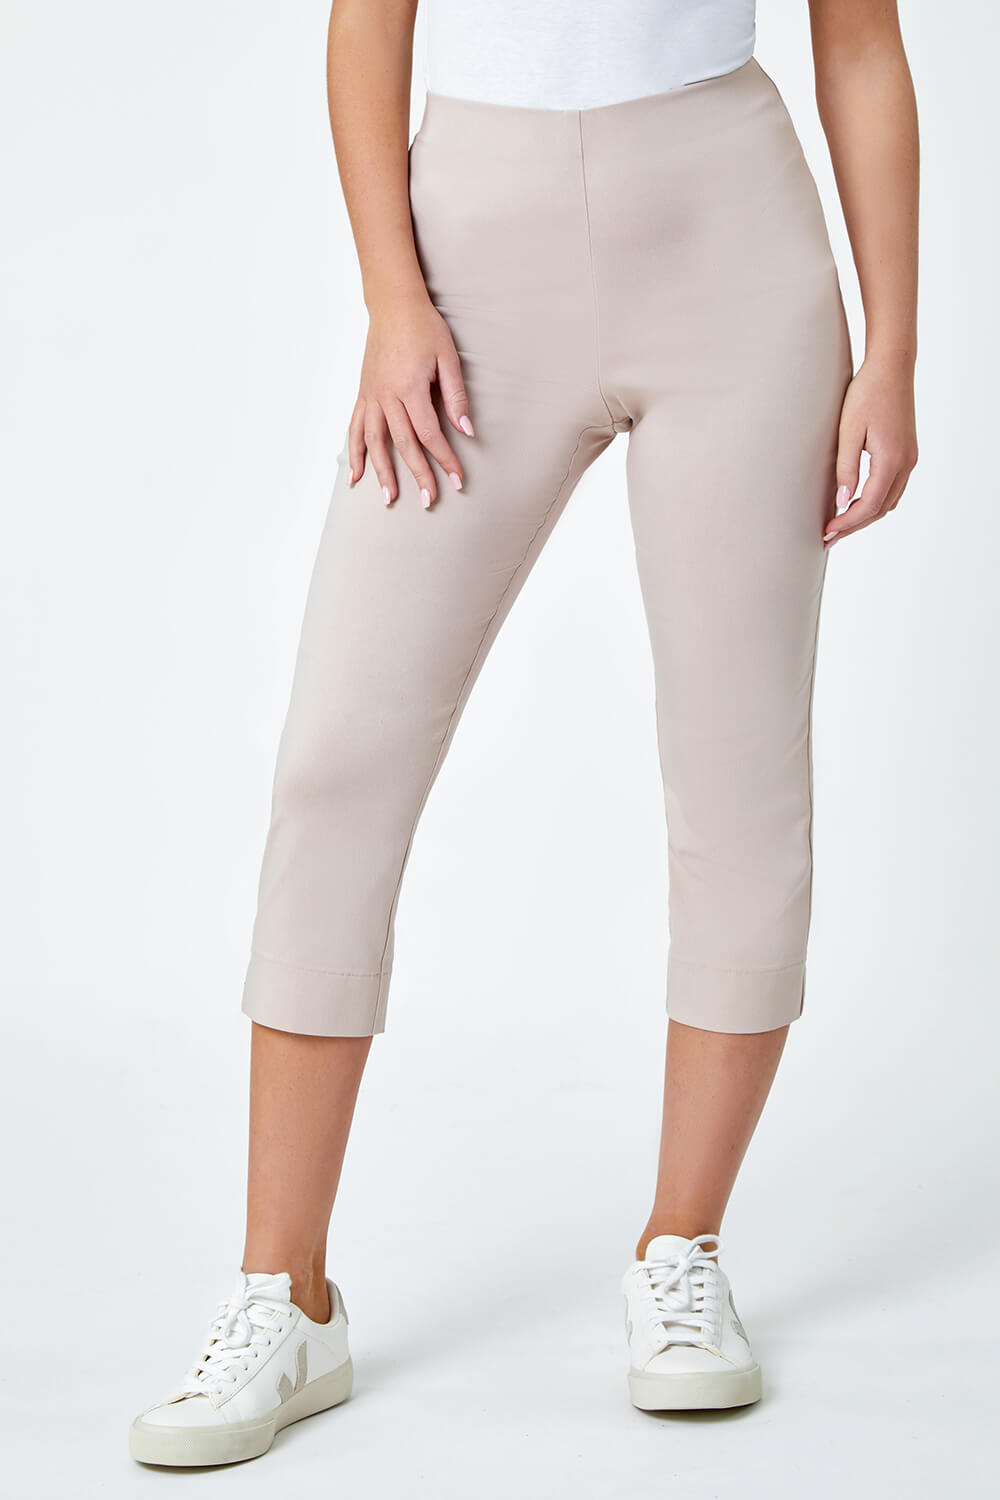 Stone Petite Cropped Stretch Trousers, Image 4 of 5